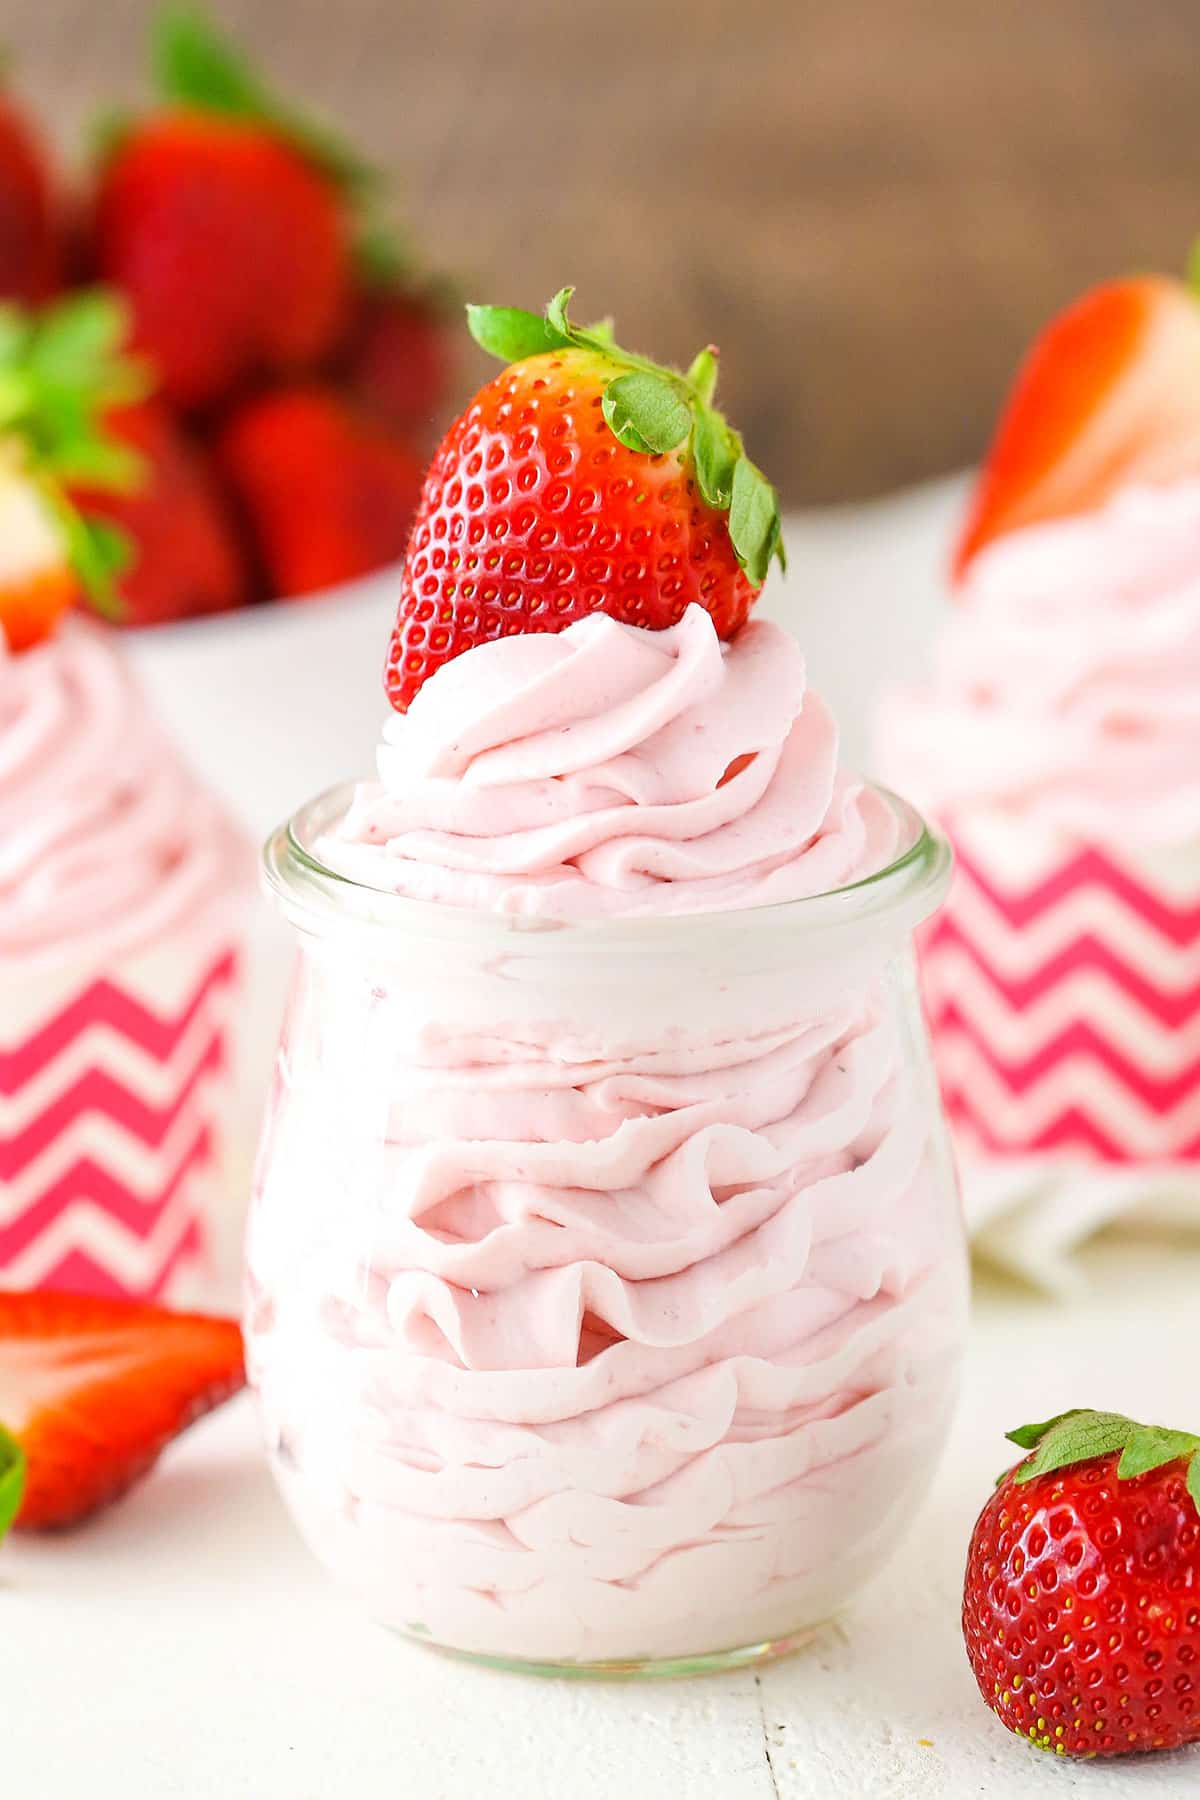 Homemade Strawberry Whipped Cream piped into a clear glass jar